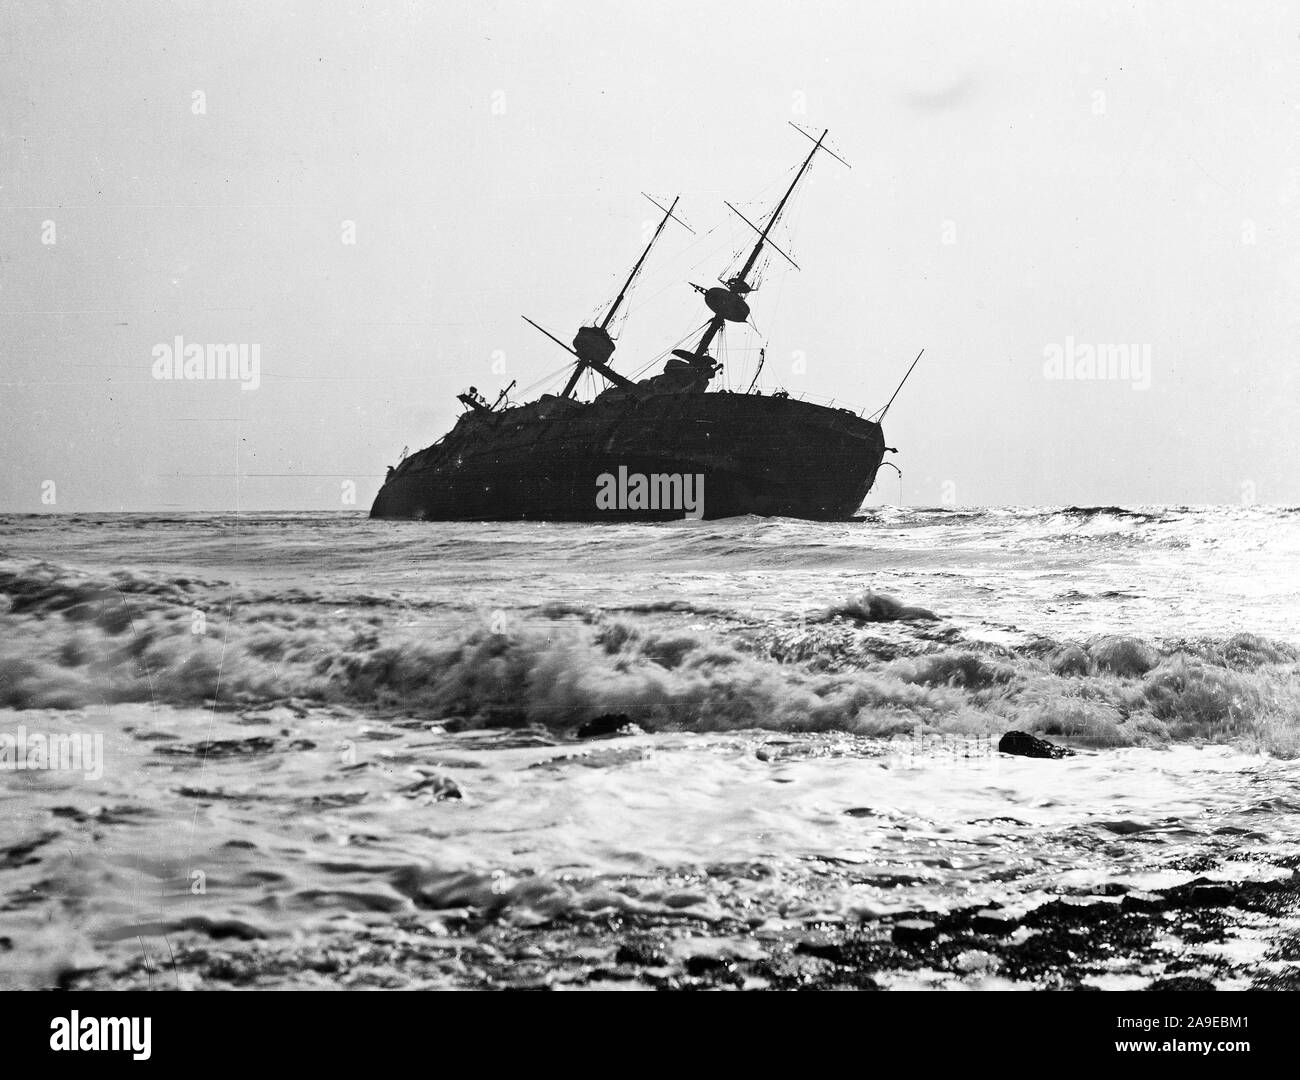 The British battleship H.M.S. Prince George with a blow after stranding for the Hondsbossche Seawall on December 28, 1921 Stock Photo